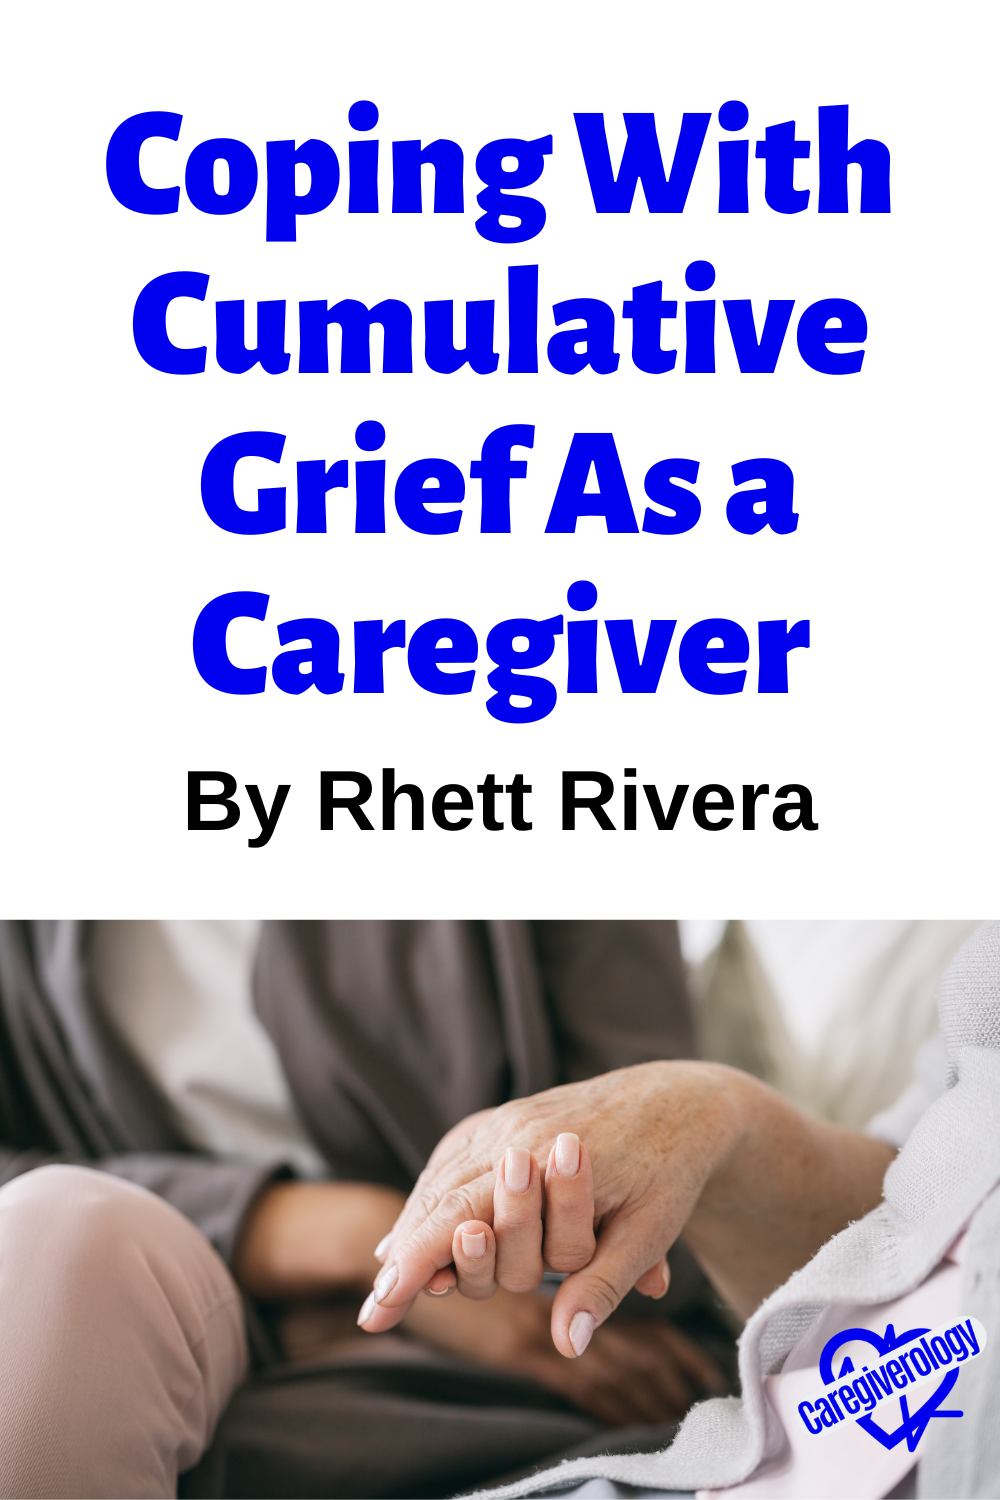 Coping With Cumulative Grief As a Caregiver